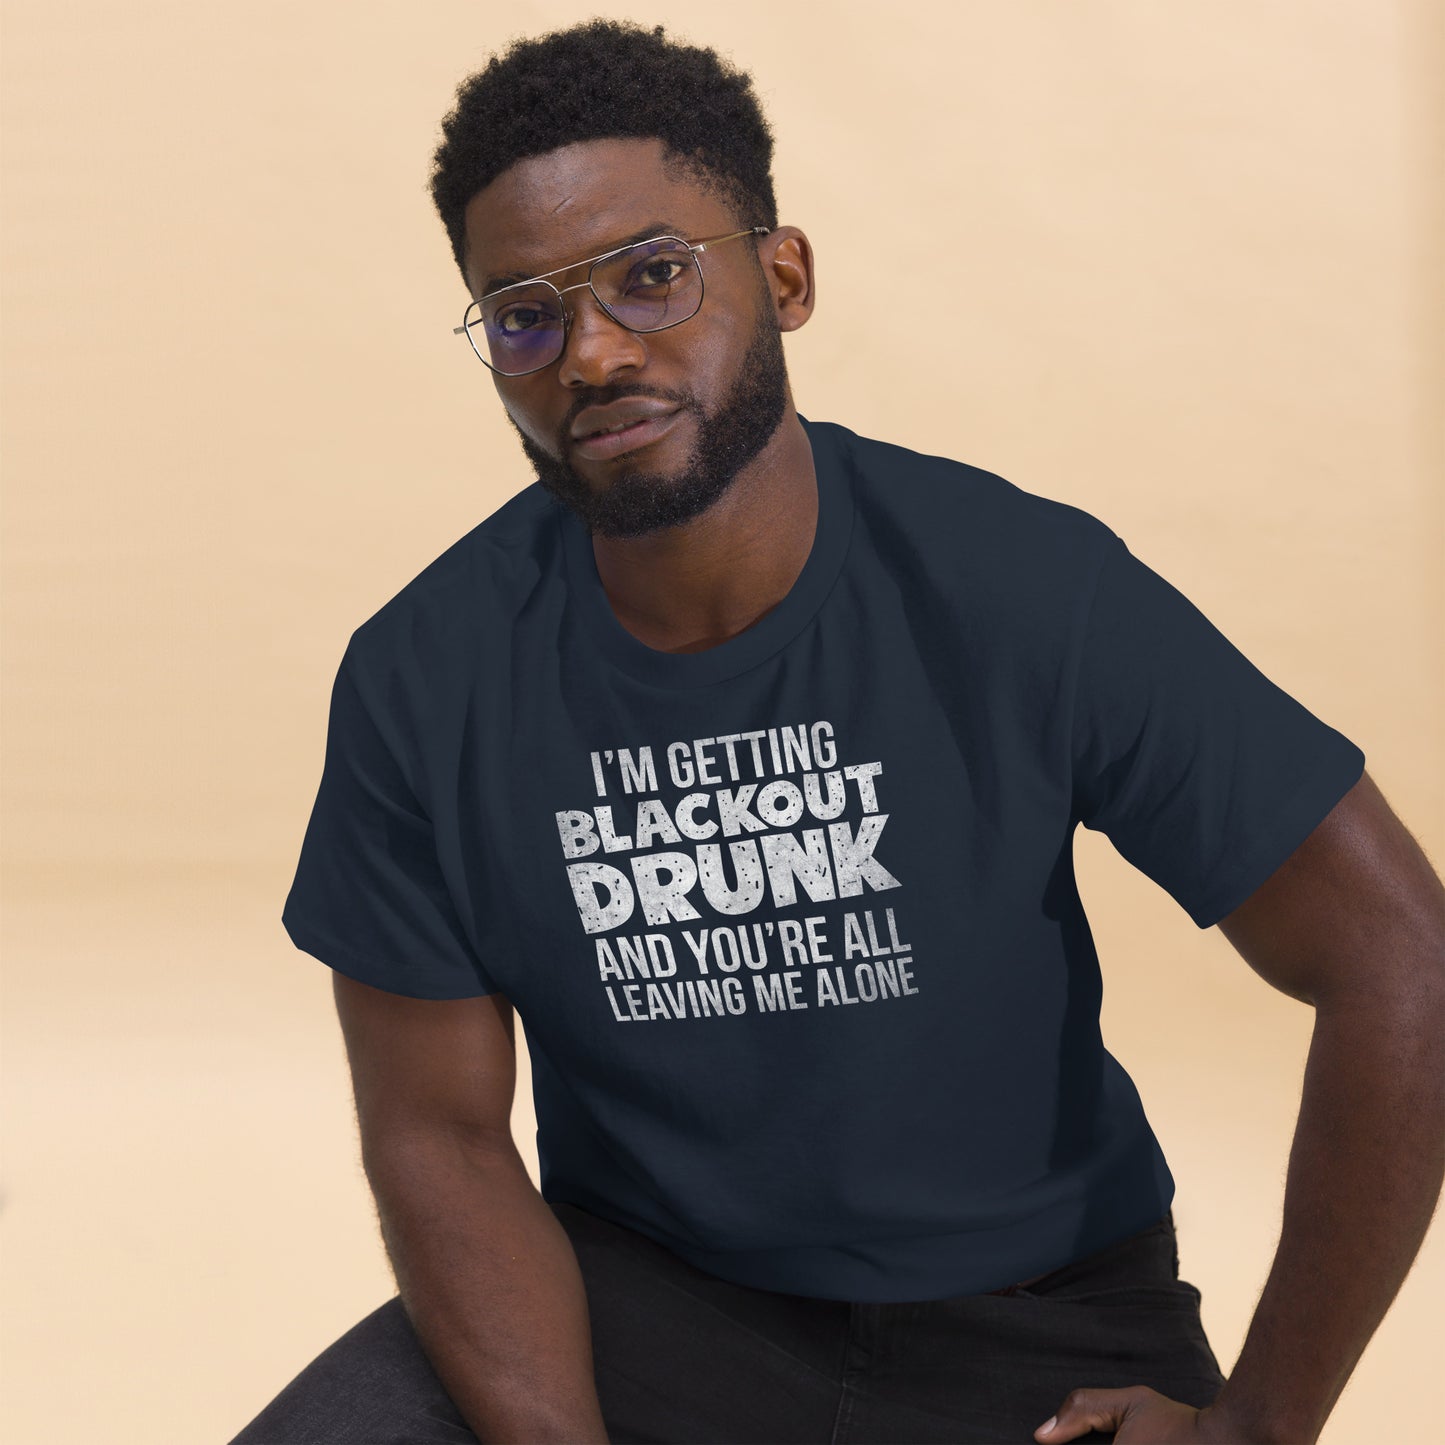 I'm Getting Blackout Drunk classic tee